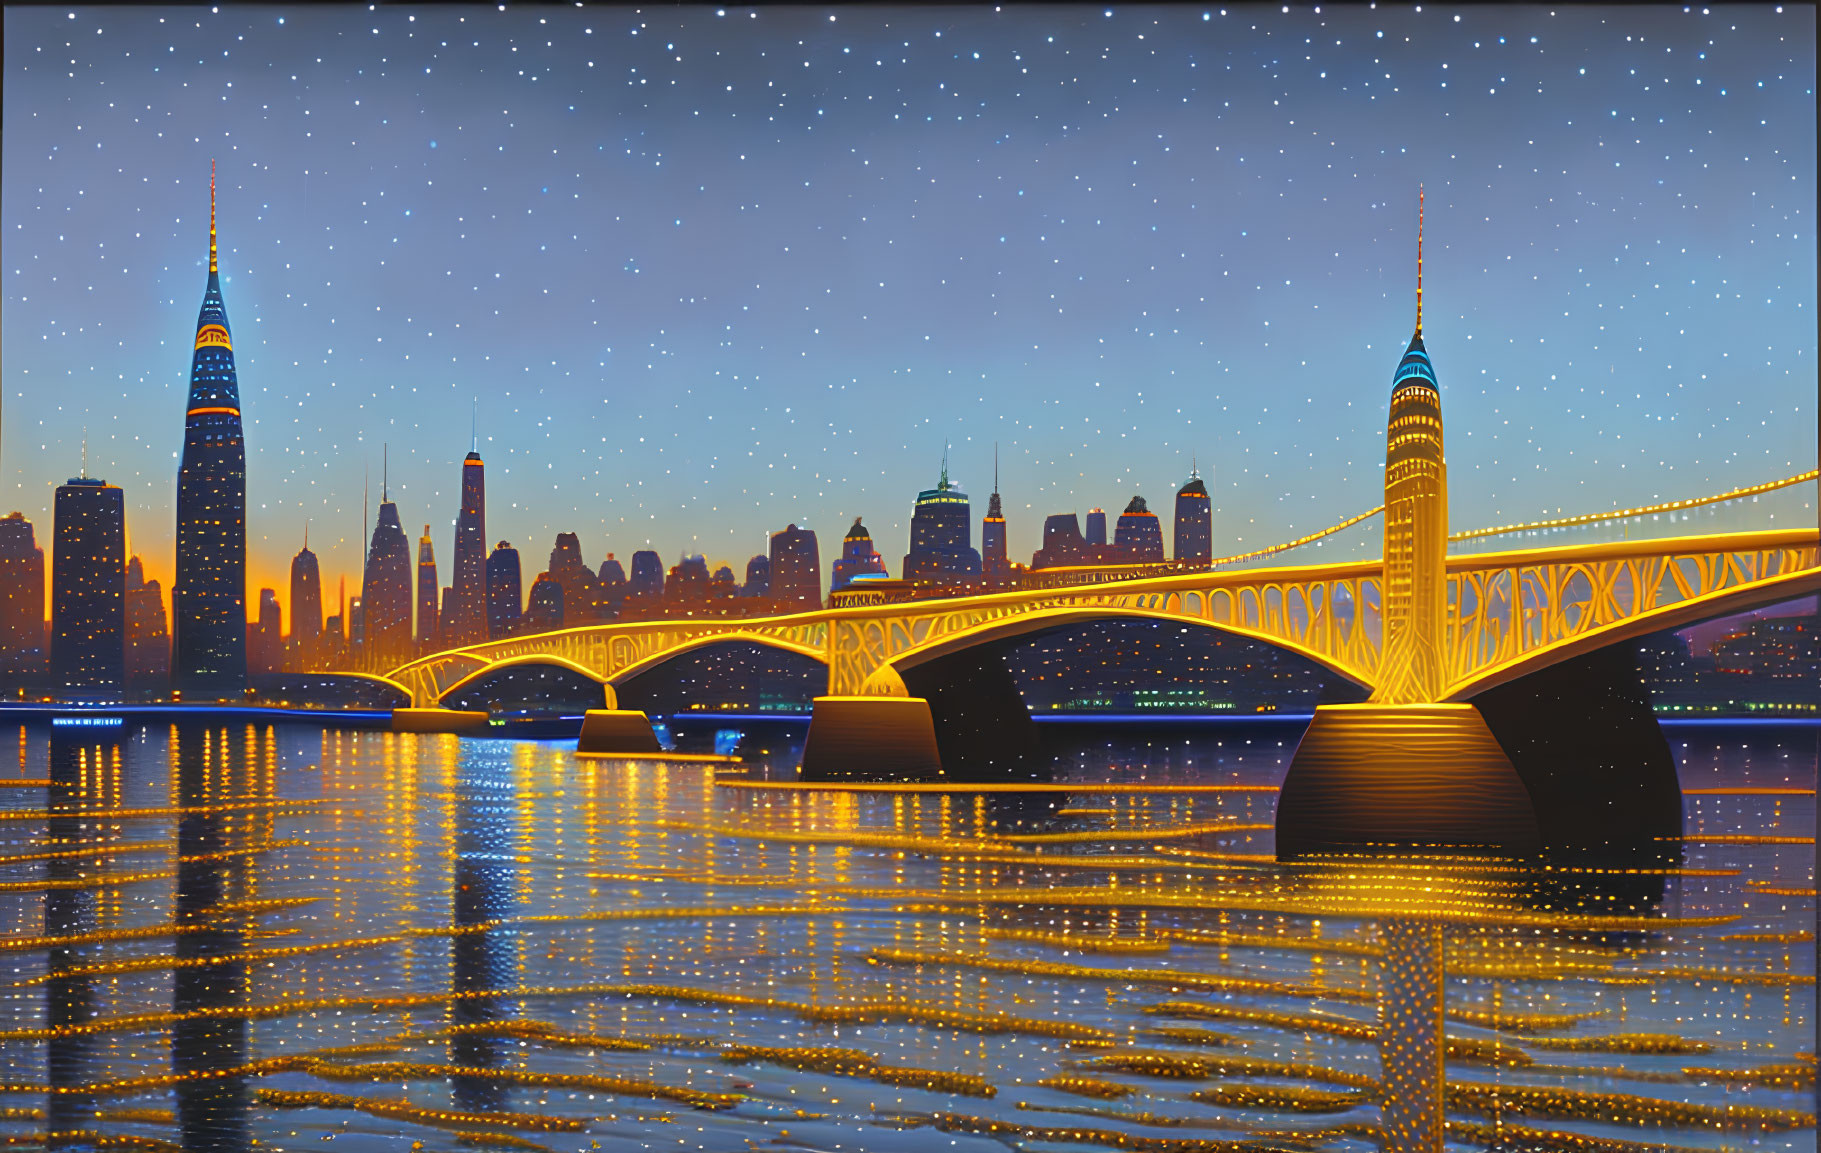 Night cityscape with illuminated bridge and skyline reflected in water